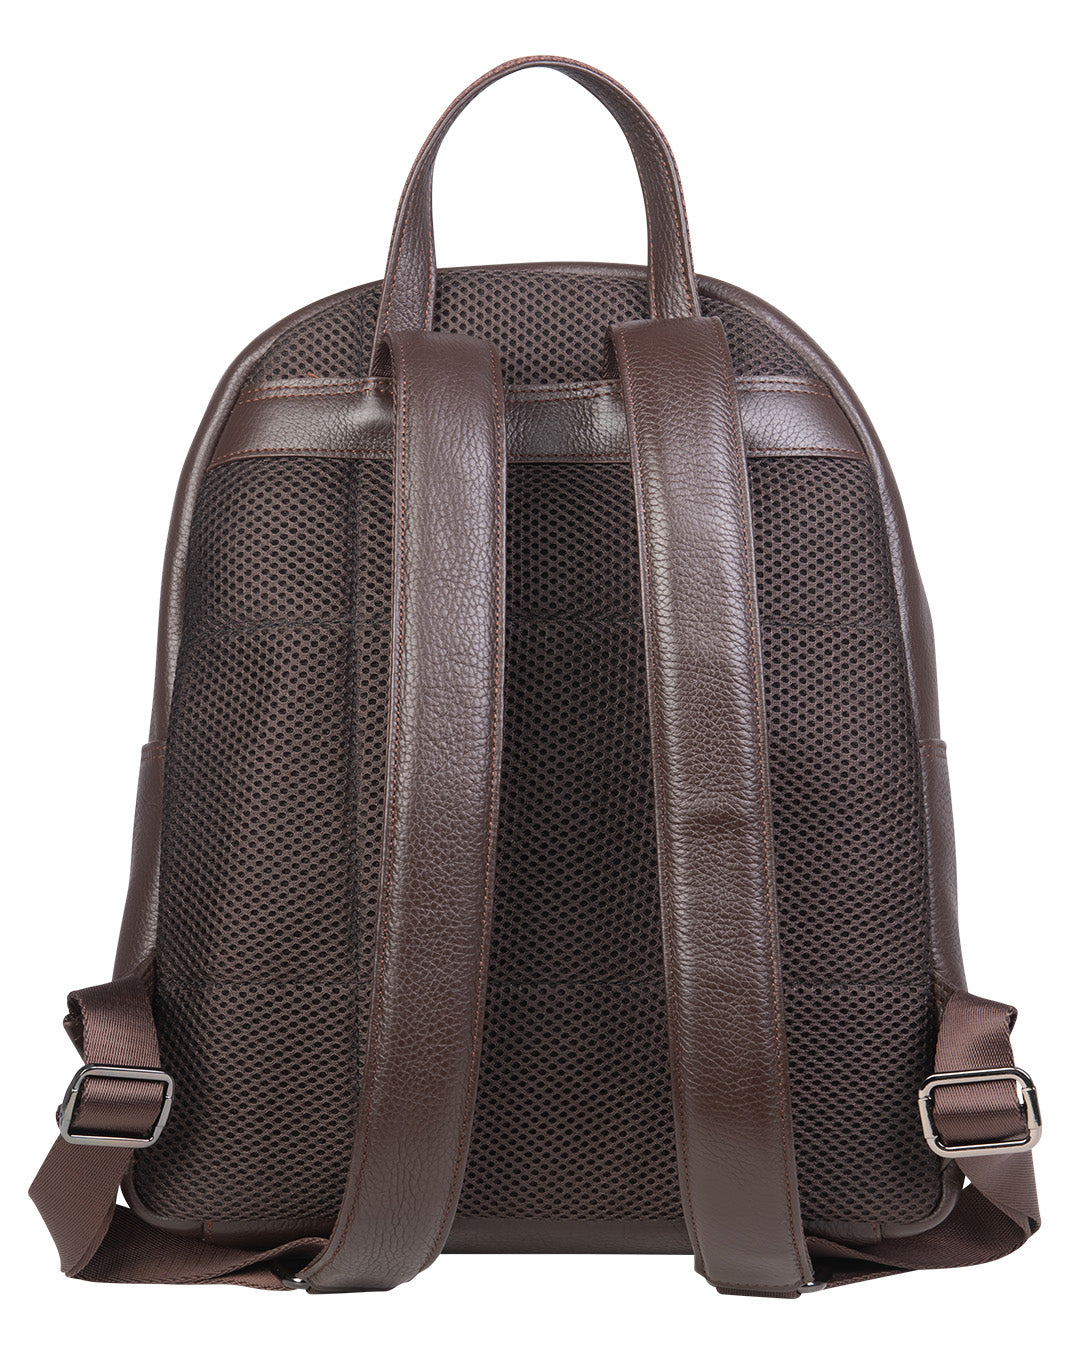 Brown Scotch Grain Leather Back Pack